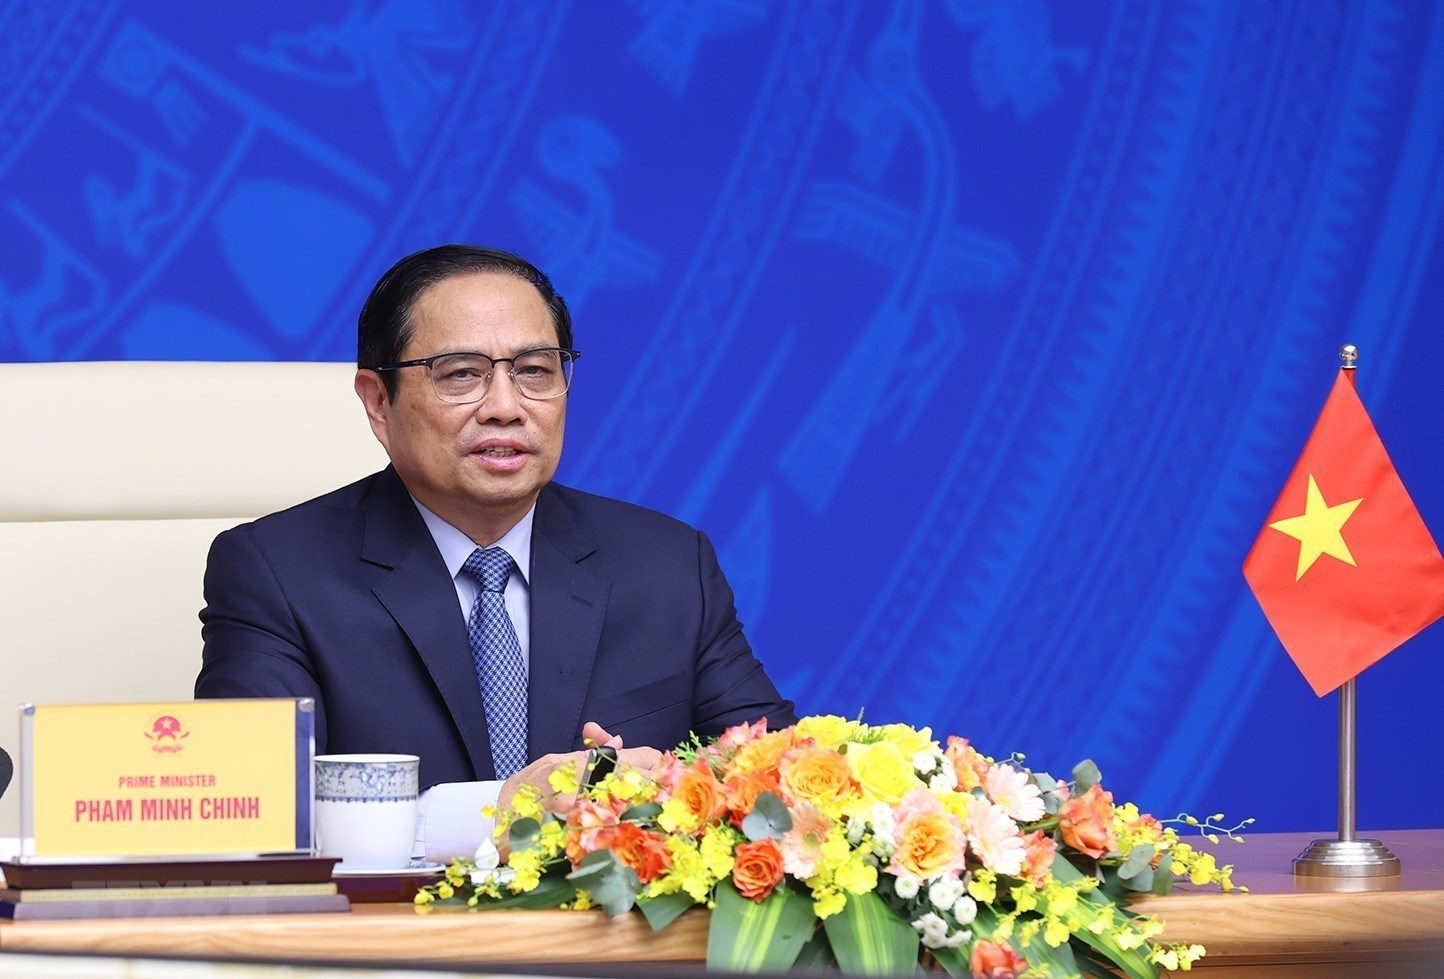 Vietnam premier attends launching ceremony of Indo-Pacific Economic Framework for Prosperity